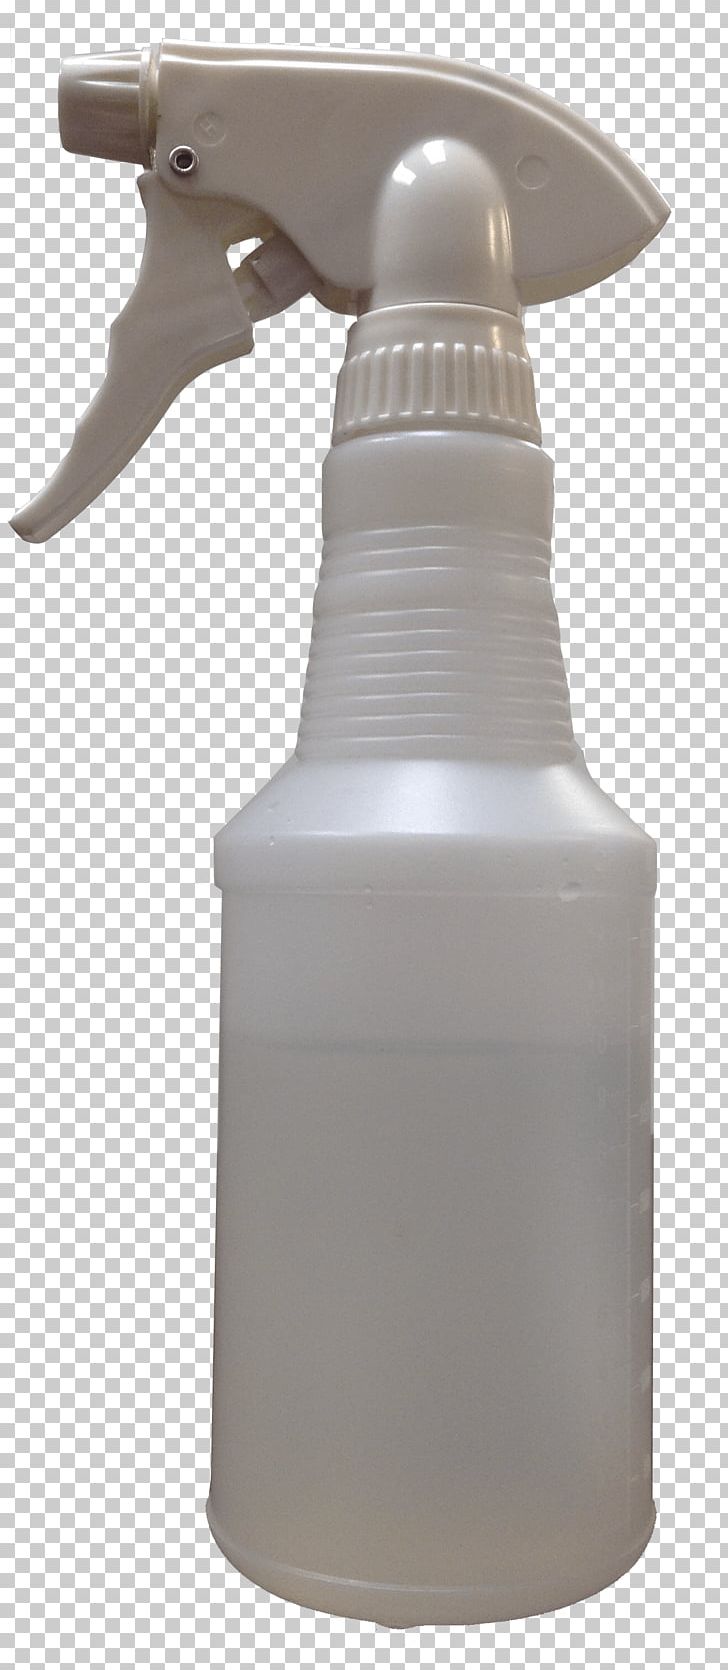 Spray Bottle Cleaning Aerosol Spray PNG, Clipart, Aerosol Spray, Bottle, Chemical Industry, Cleaning, Cleaning Agent Free PNG Download